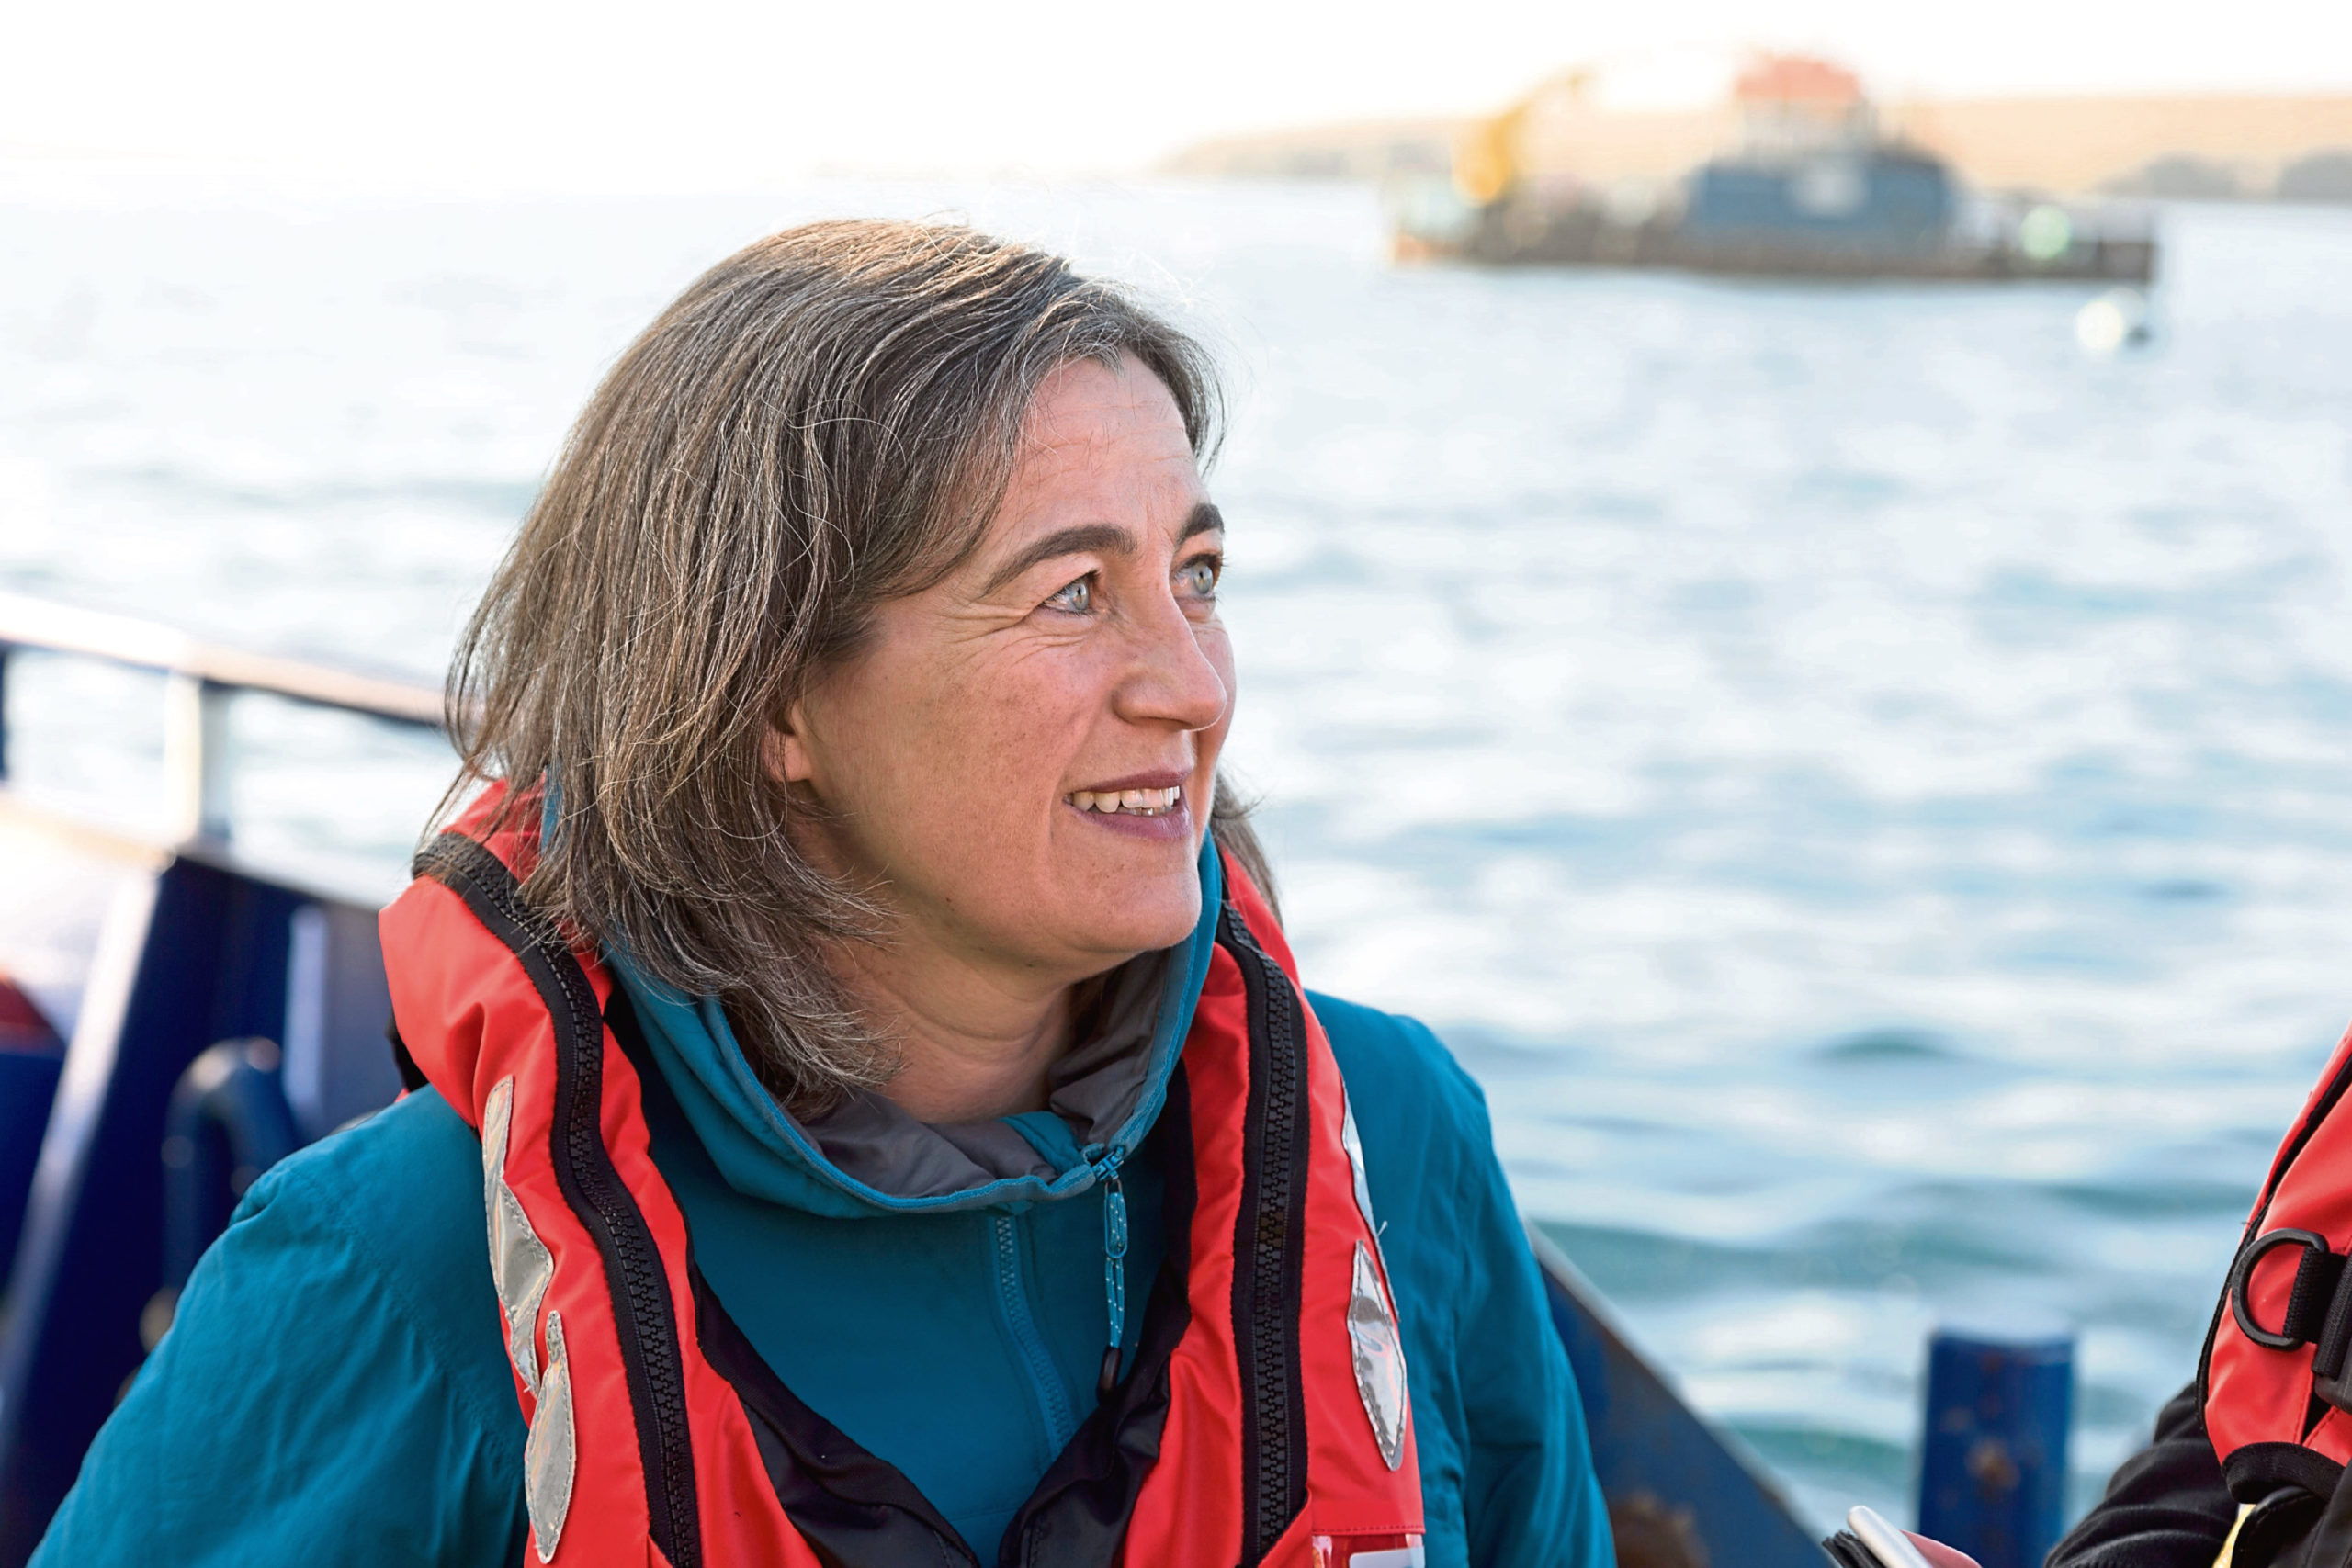 Julie Hesketh-Laird, Chief Executive of the Scottish Salmon Producers Organisation